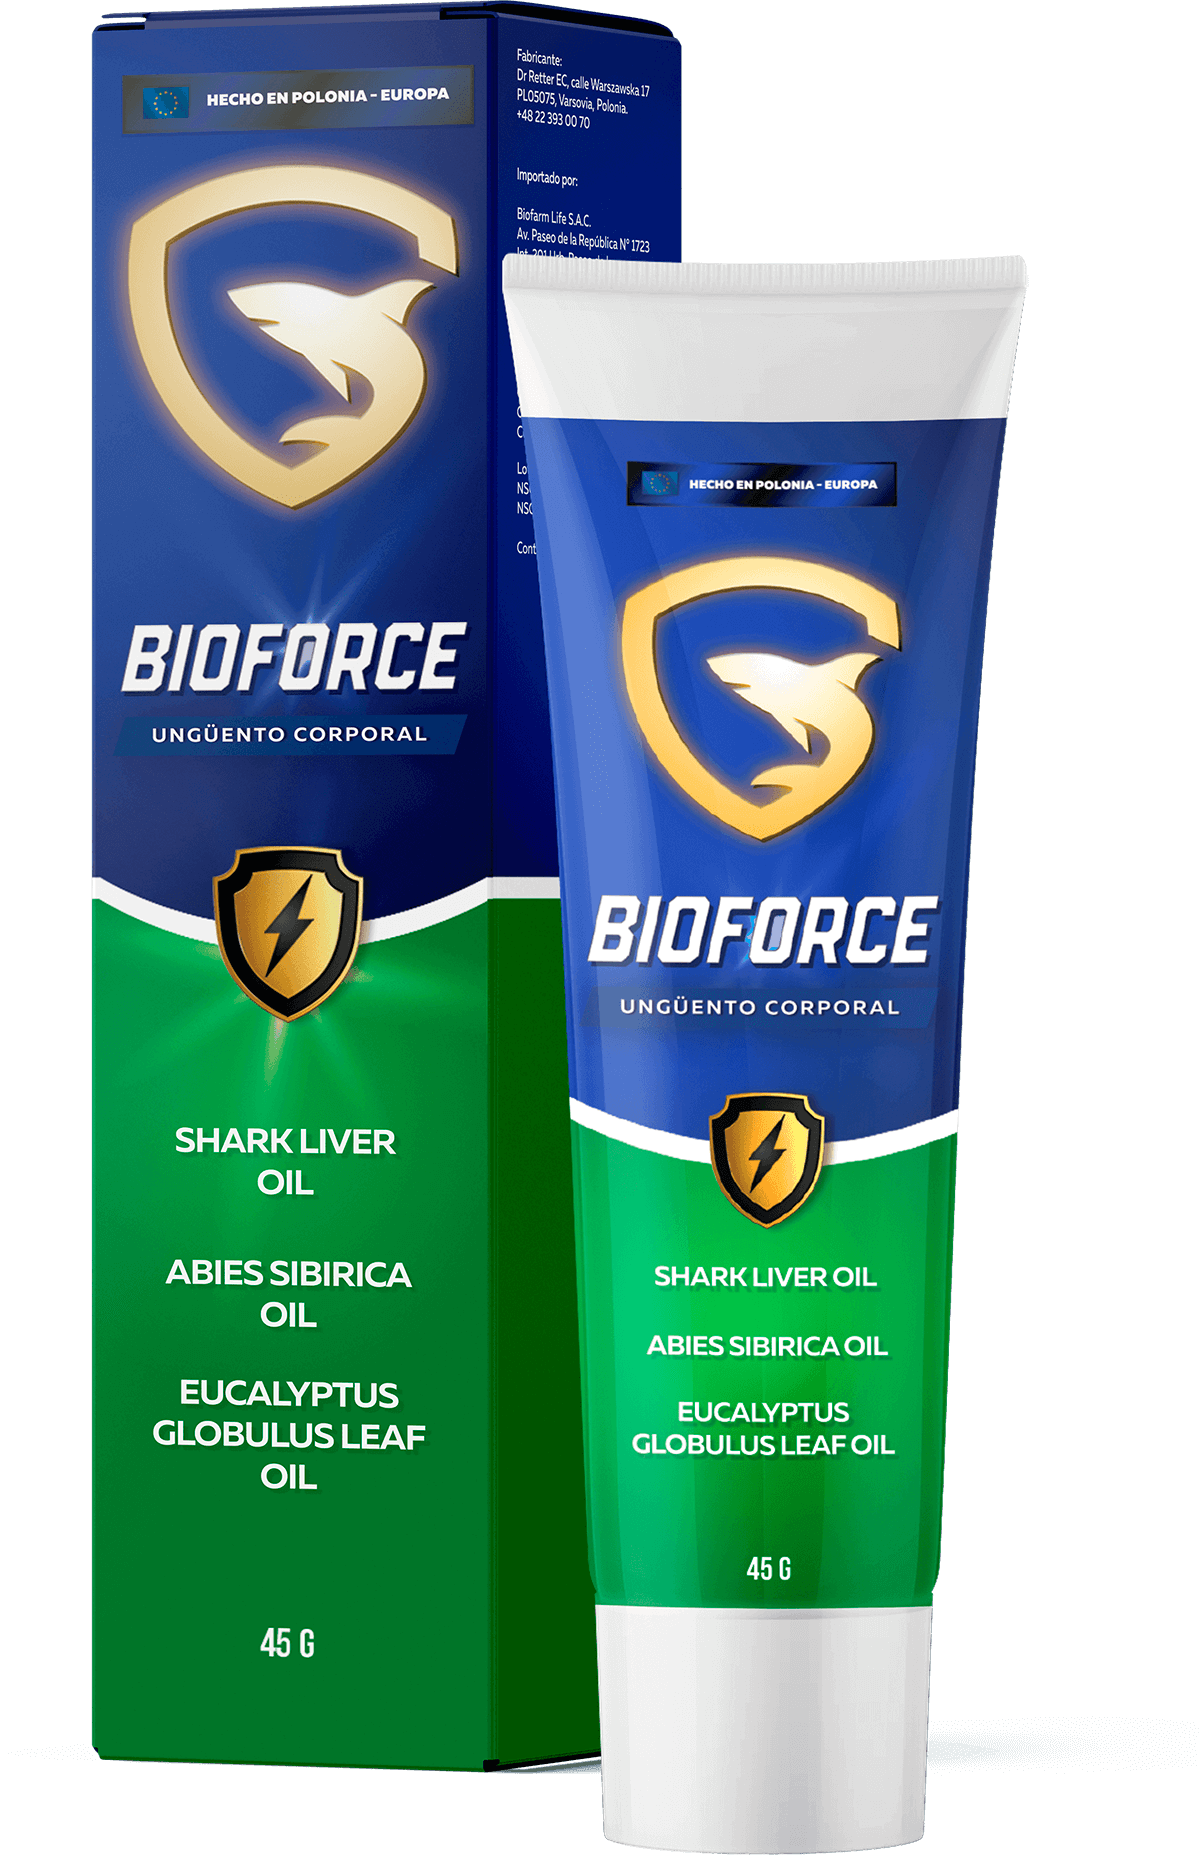 Bioforce what is it?